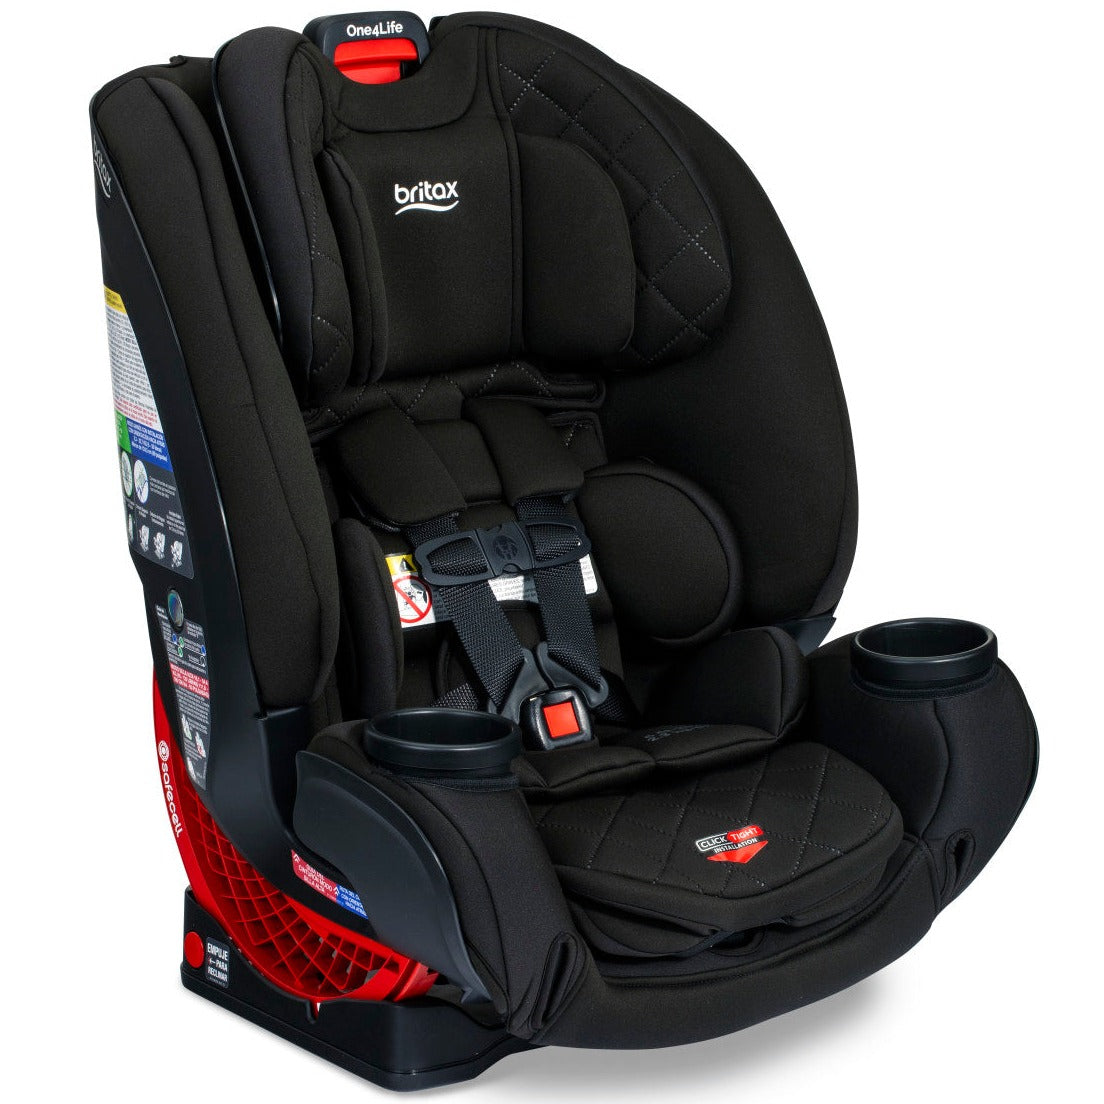 Britax One4Life ClickTight All-in-One Car Seat – Lakeland Baby and